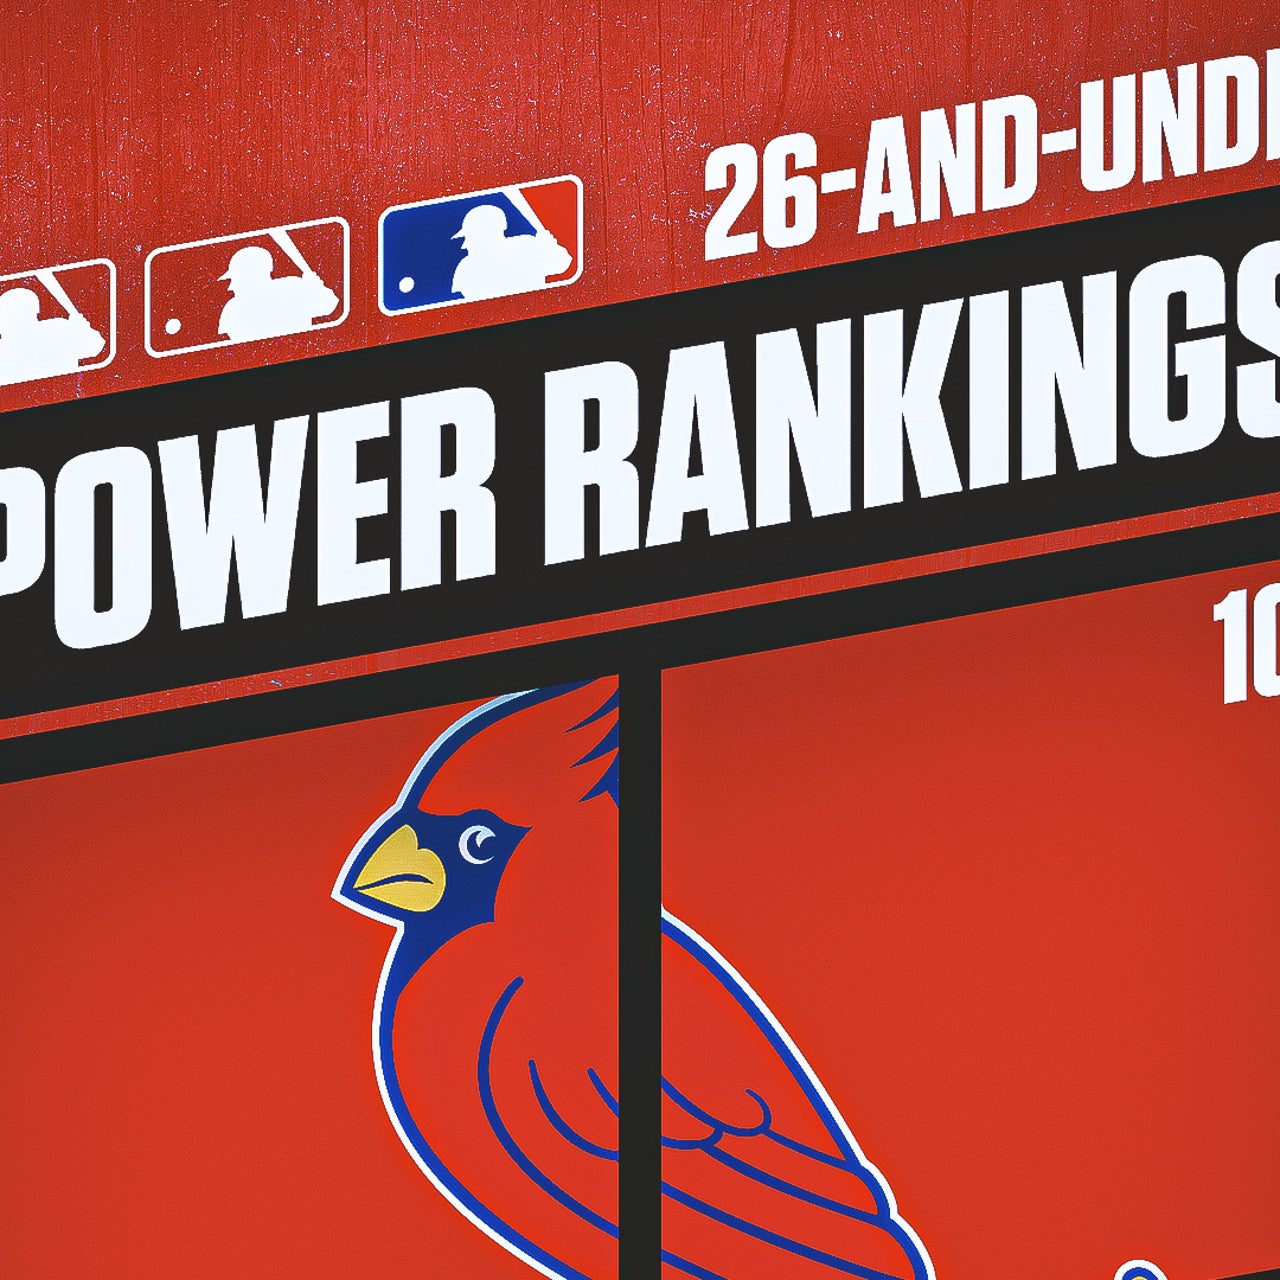 MLB 26-and-under power rankings: No. 10 St. Louis Cardinals - BVM Sports